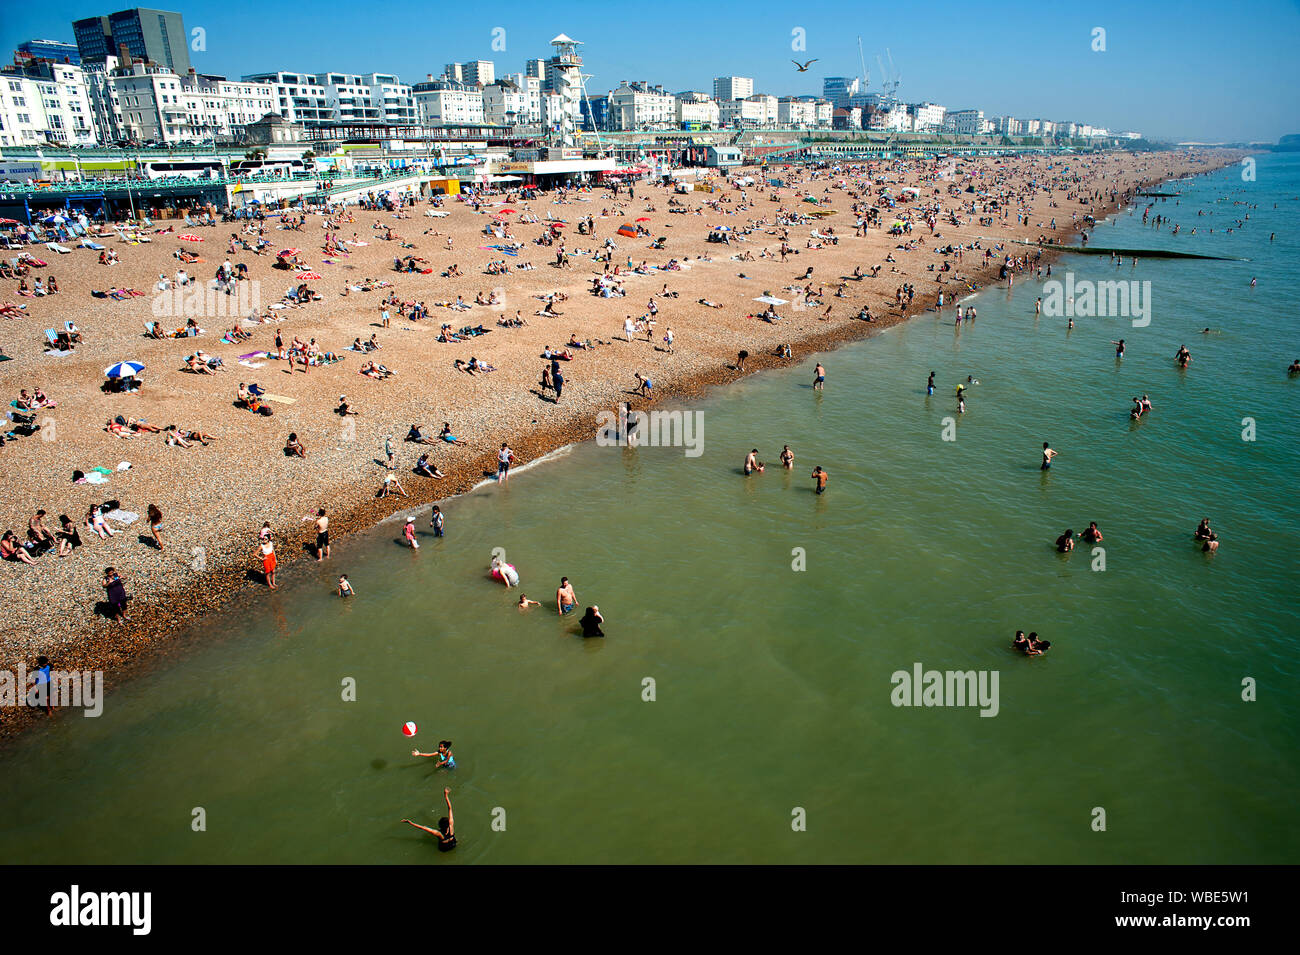 People flock to the beach in Brighton to sunbathe and swim in the record- breaking hot temperatures of summer 2019. Stock Photo